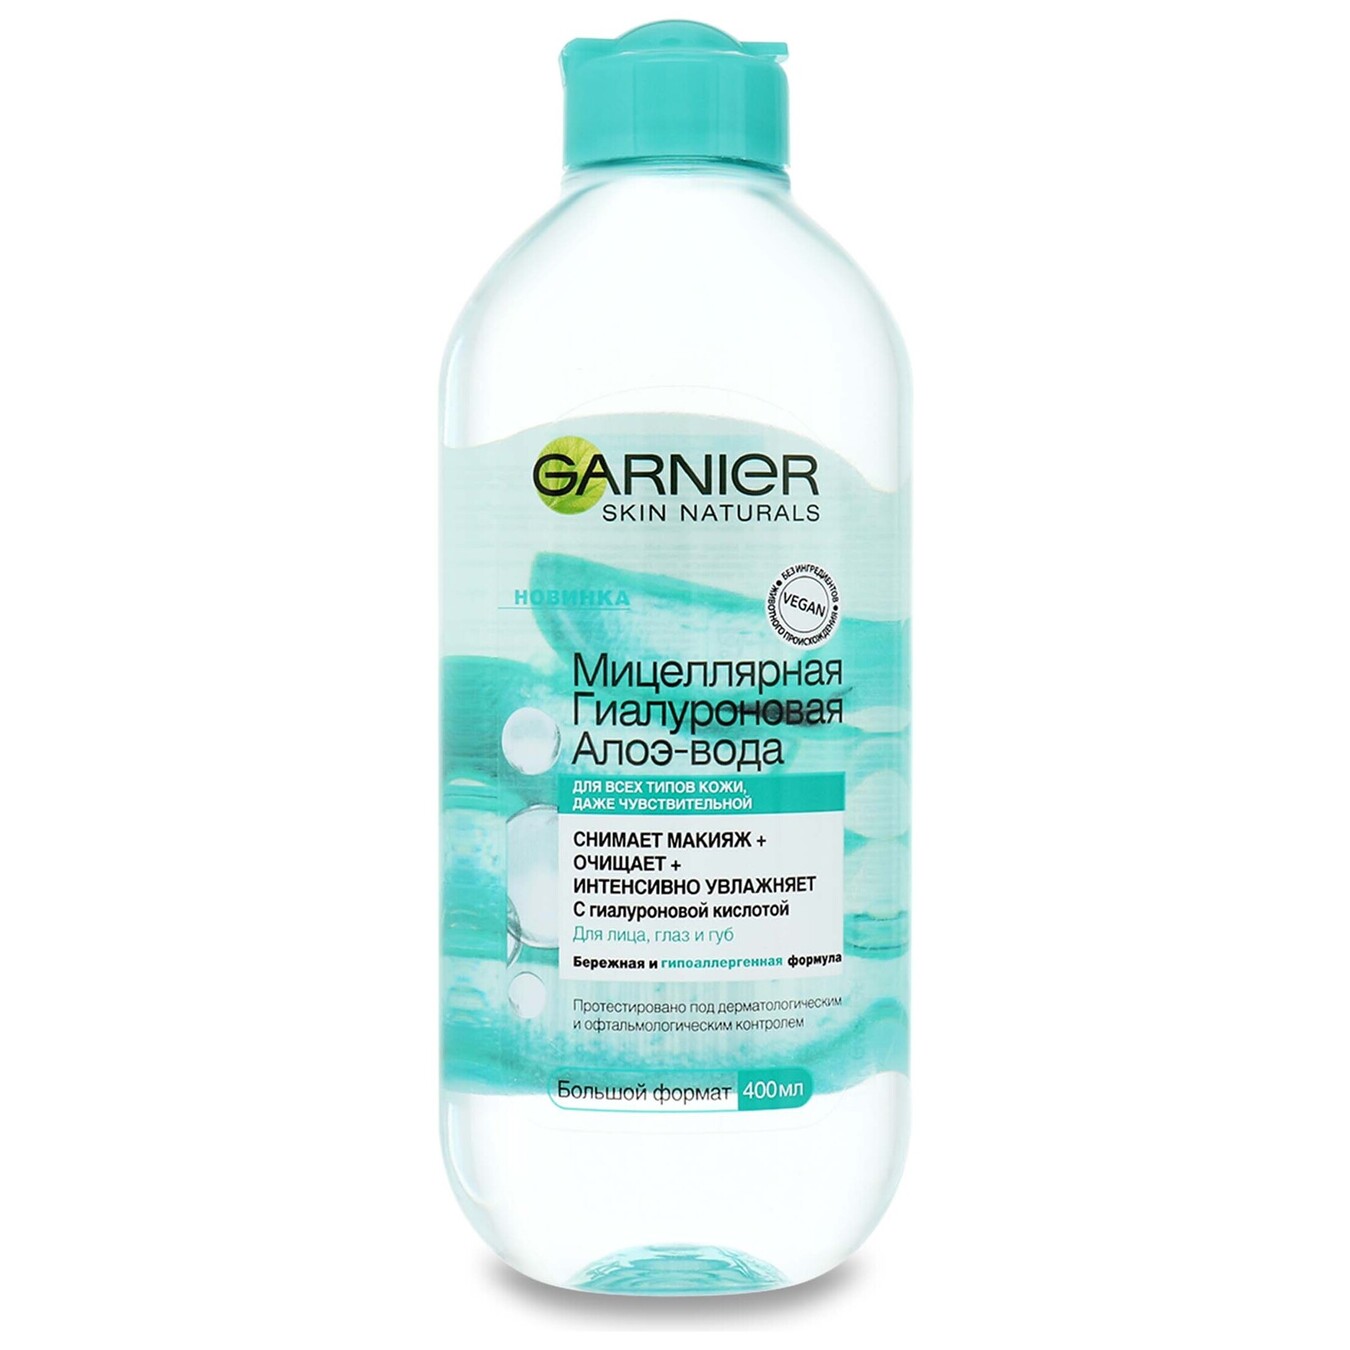 Micellar water Garnier SkinNaturals Aloe Hyaluronic for cleansing the skin of the face 400 ml